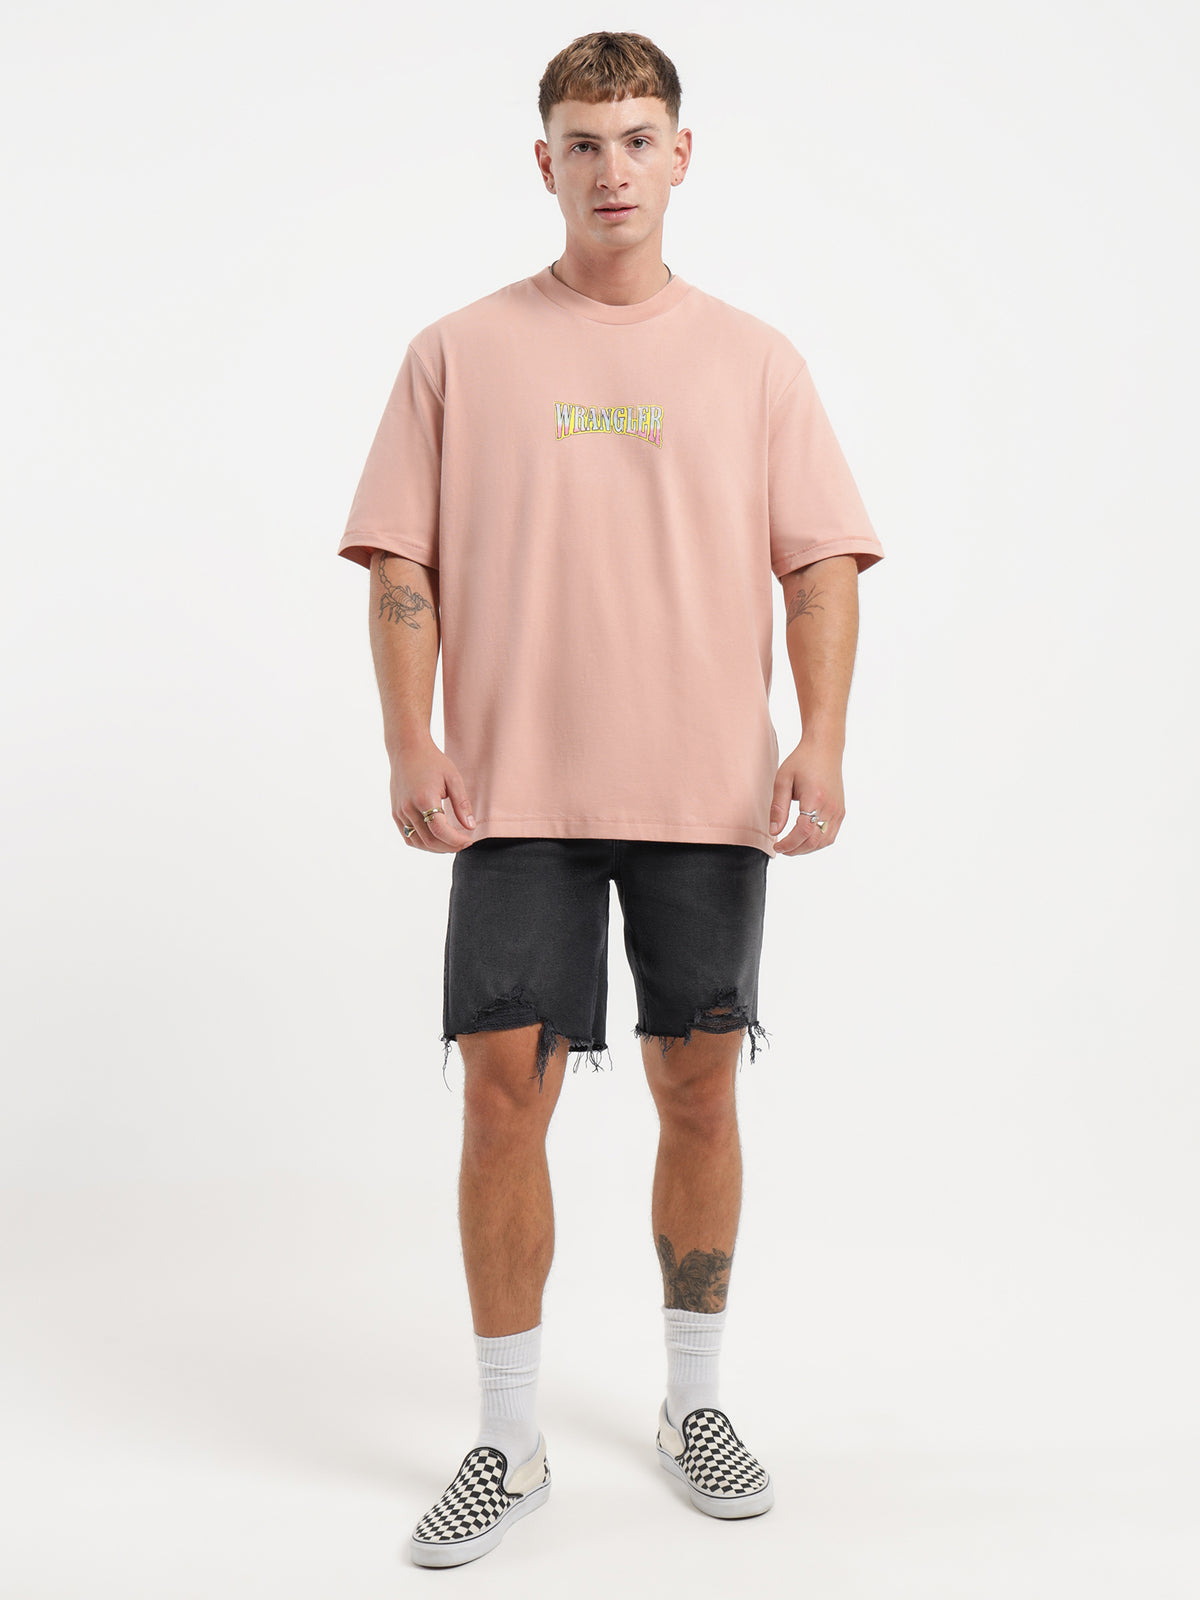 All Seeing Sun T-Shirt in Coral Acid Pink